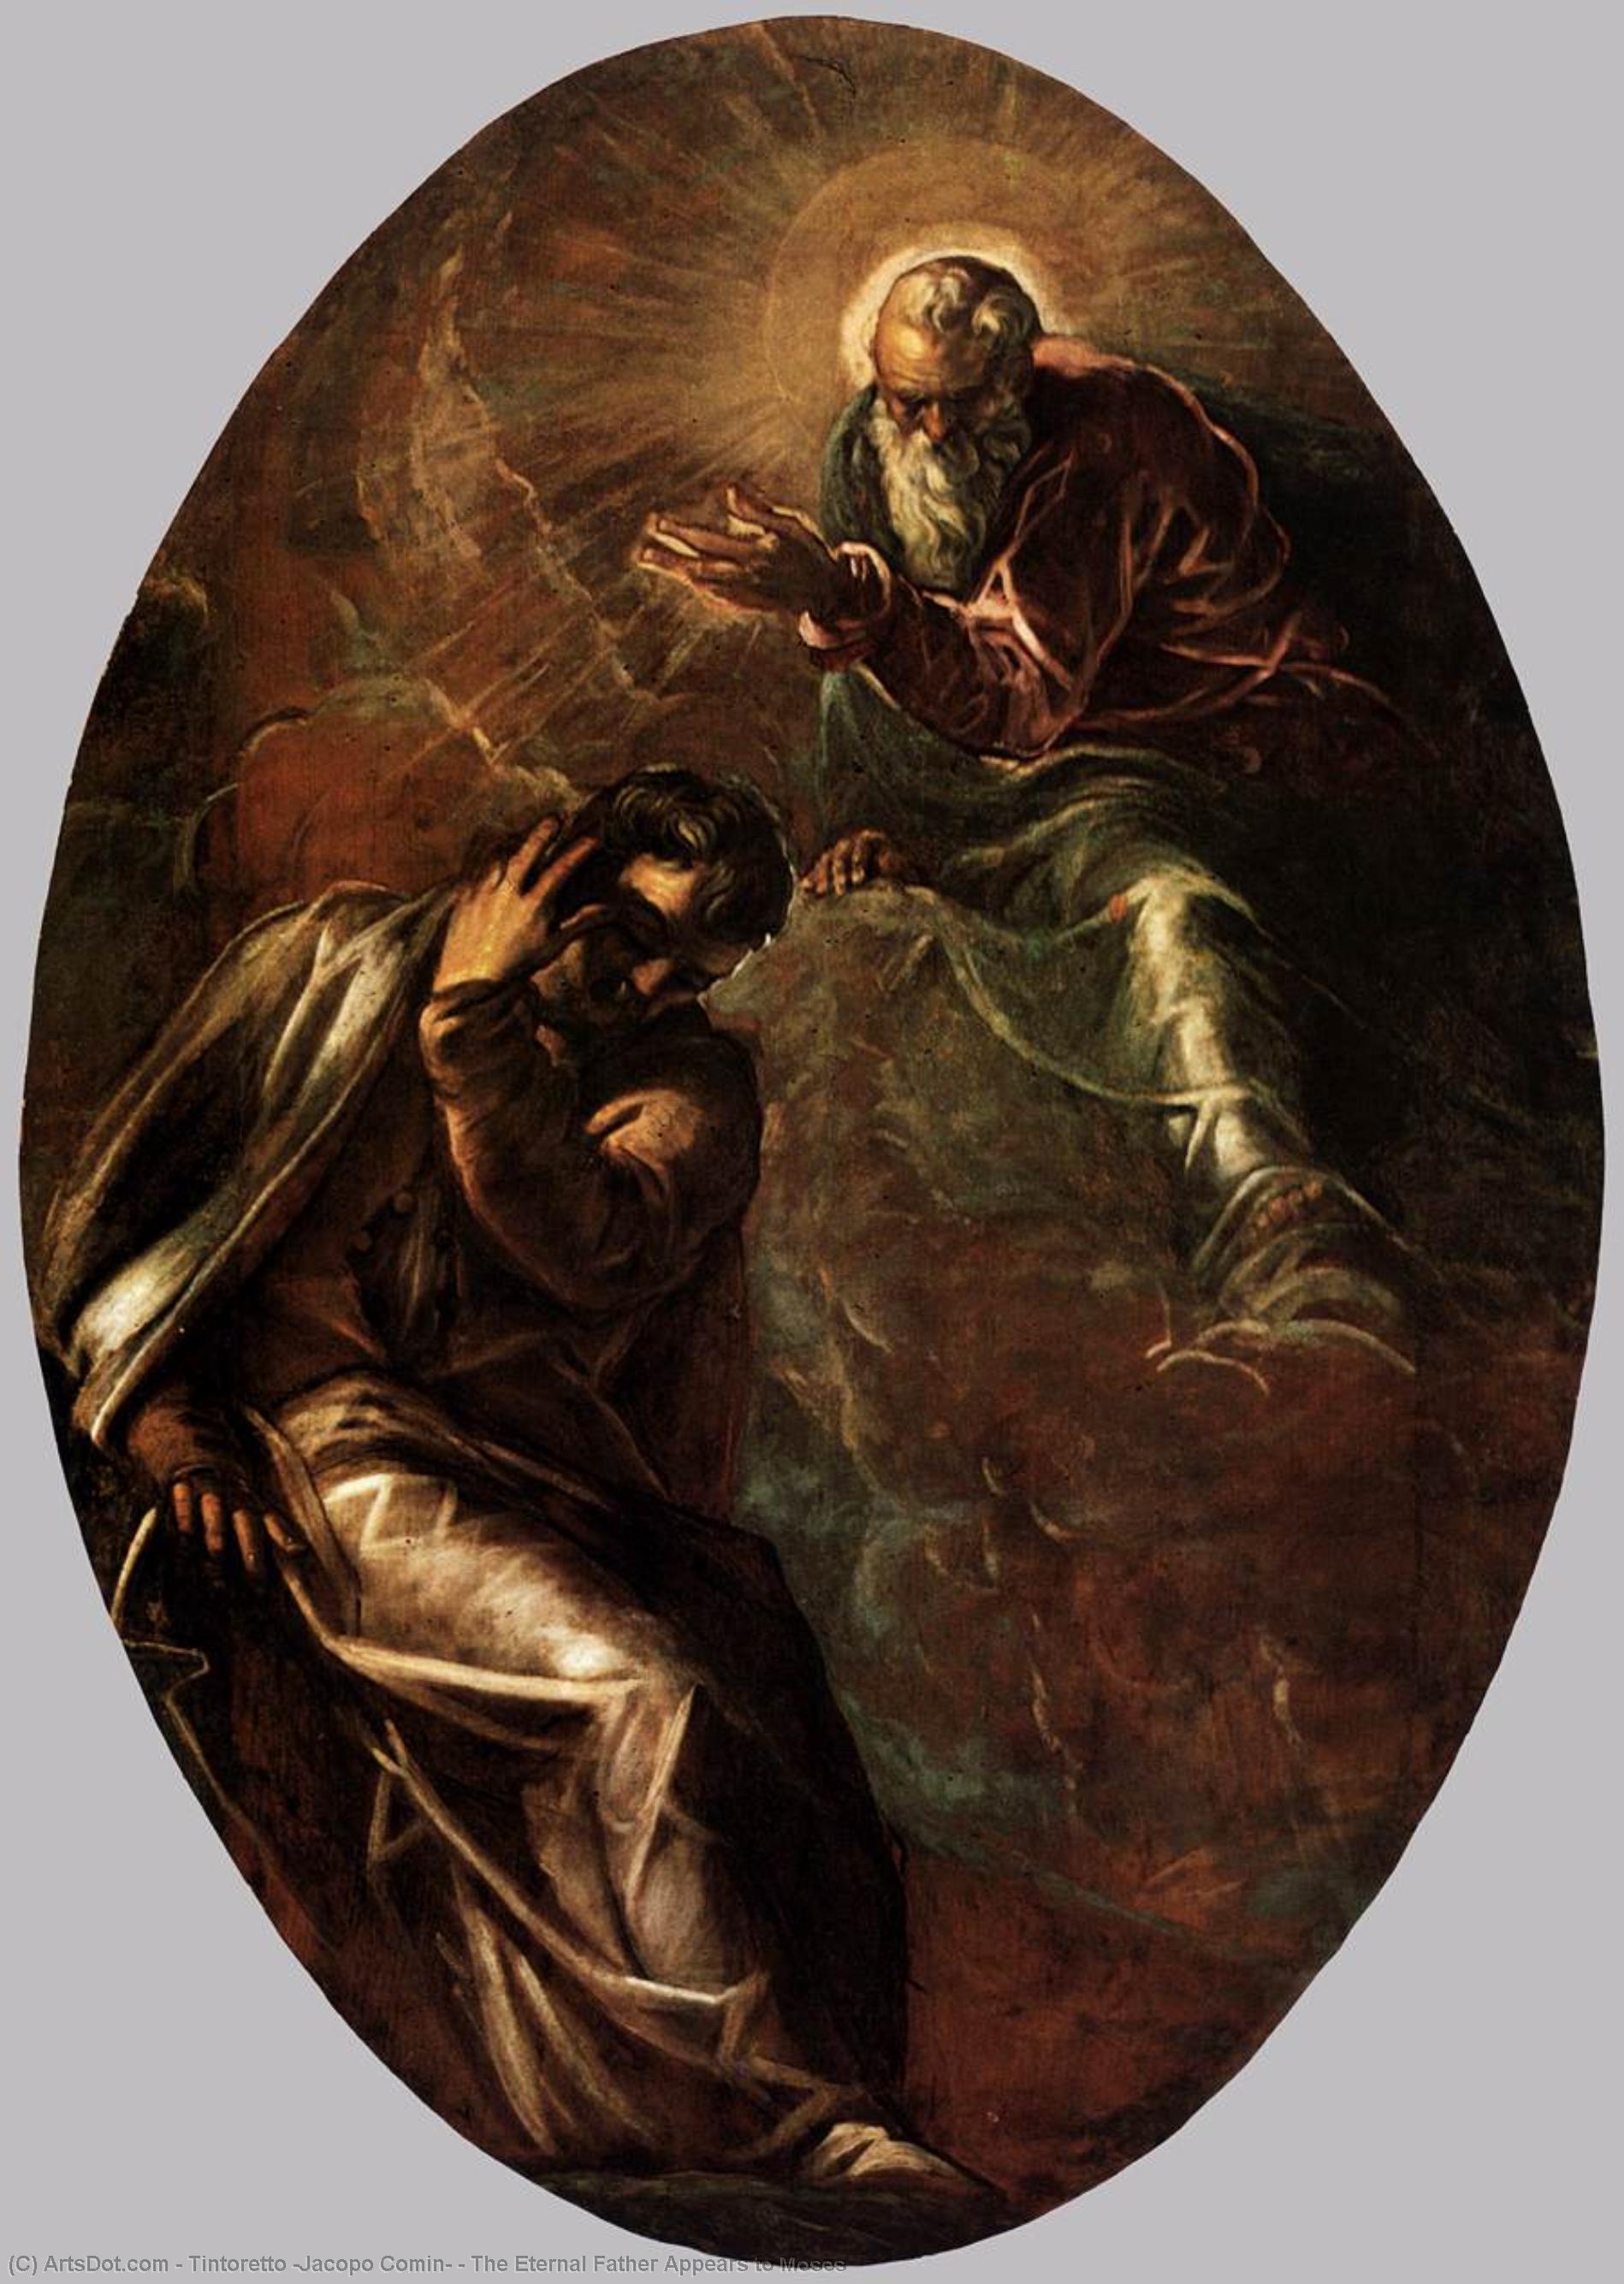 WikiOO.org - Encyclopedia of Fine Arts - Maleri, Artwork Tintoretto (Jacopo Comin) - The Eternal Father Appears to Moses